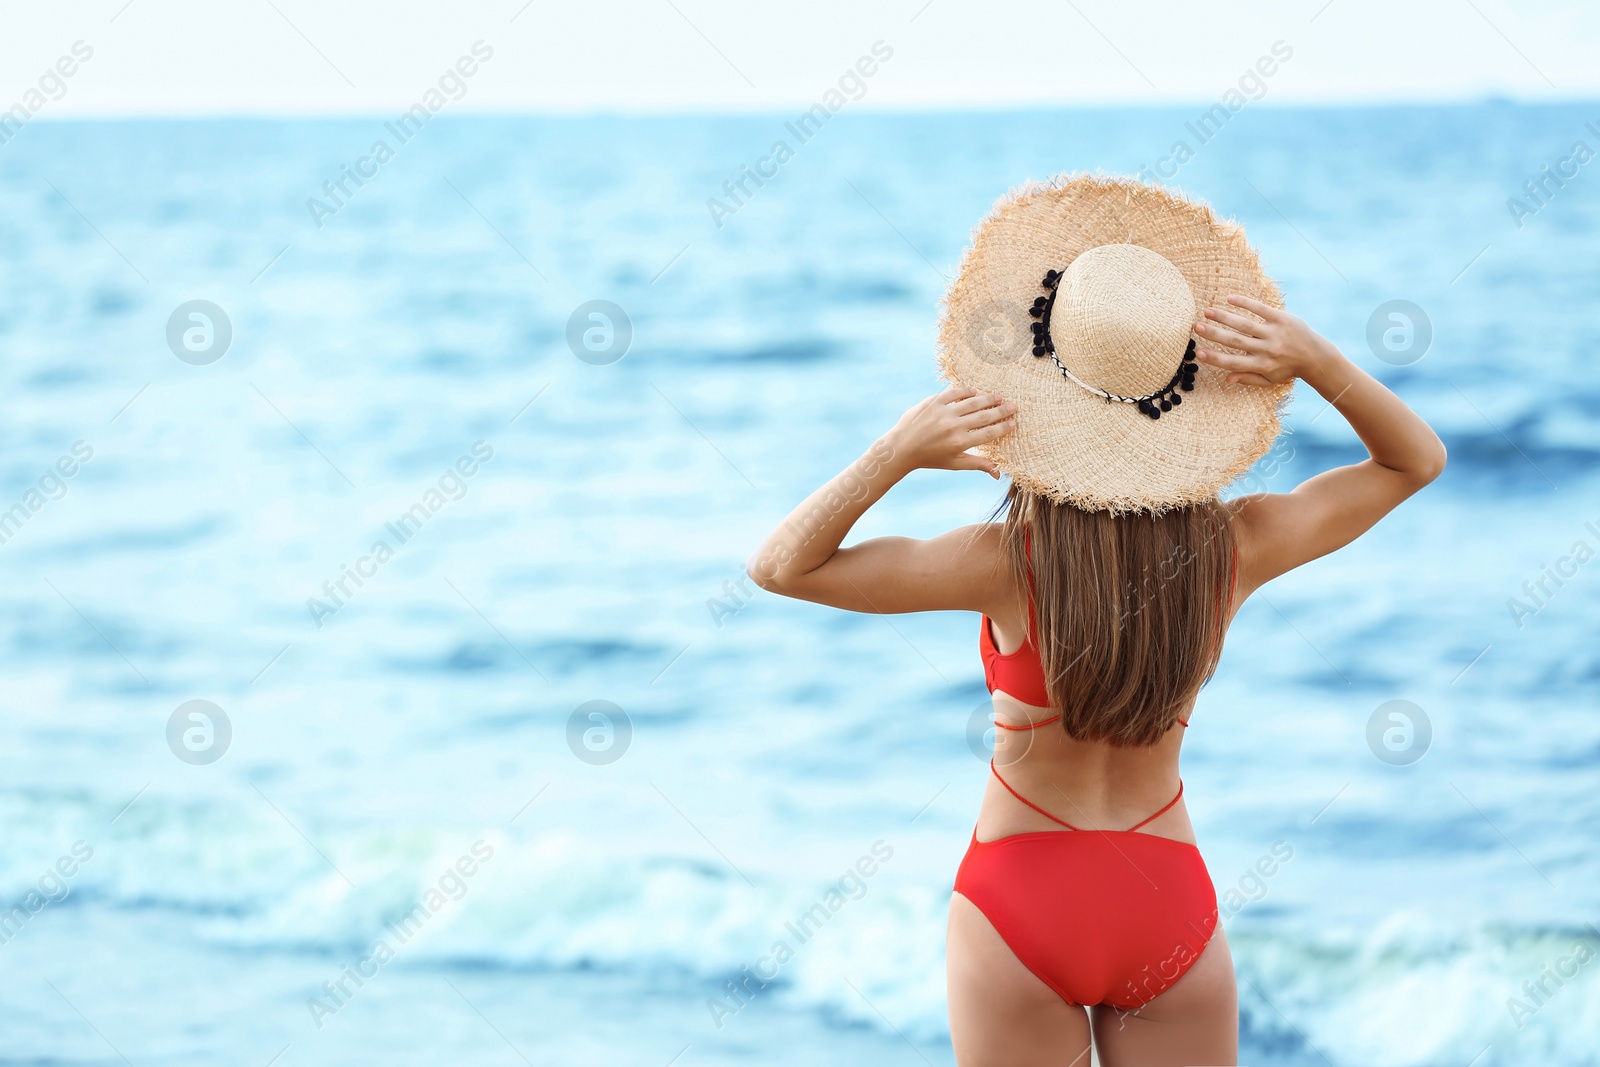 Photo of Attractive young woman in beautiful one-piece swimsuit on beach